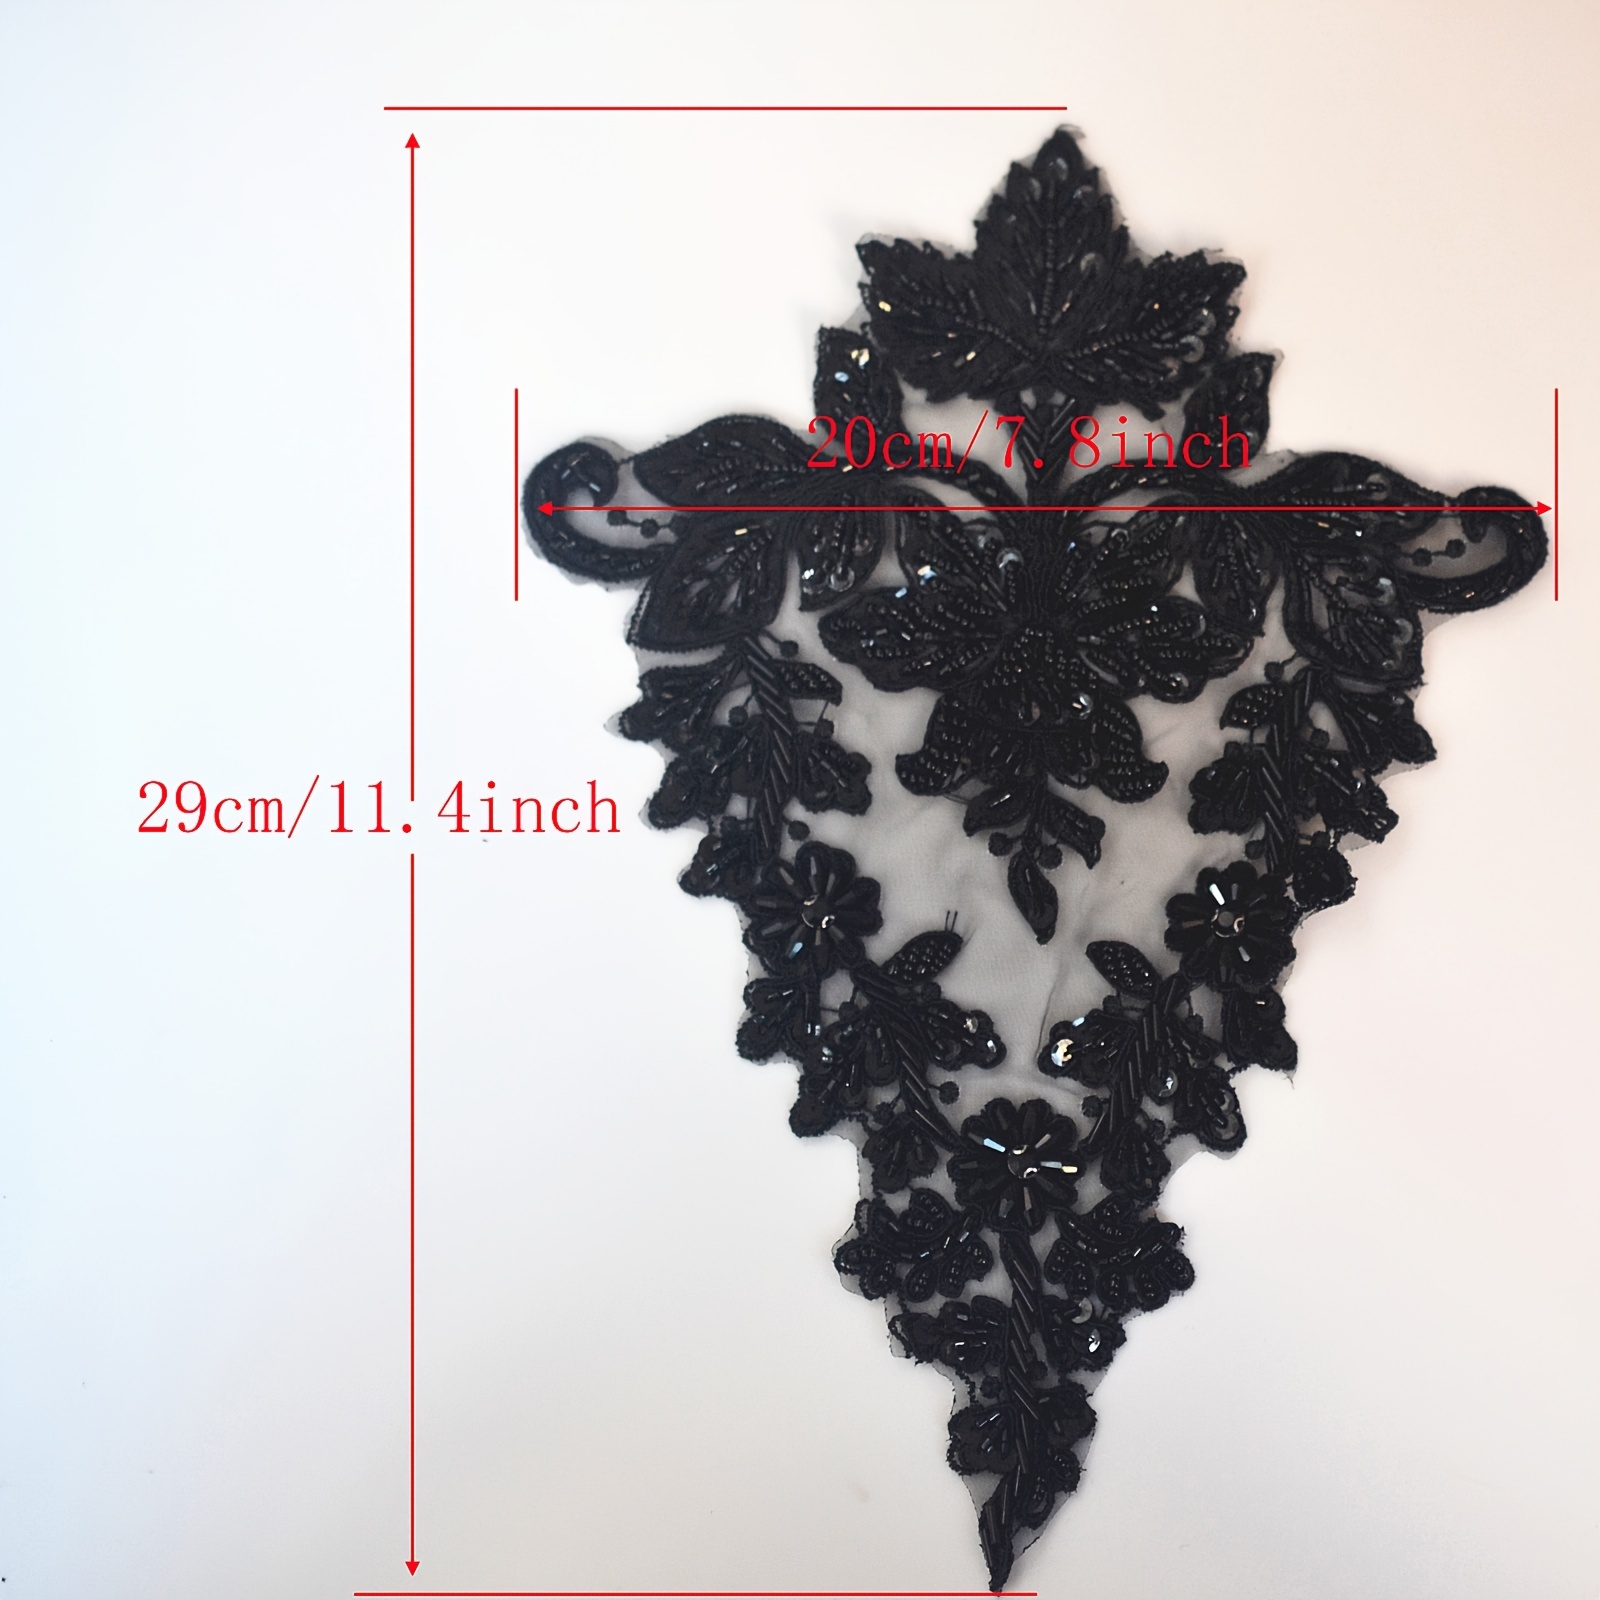 10pcsx 2Layers black Floral lace patches for clothing sewing women